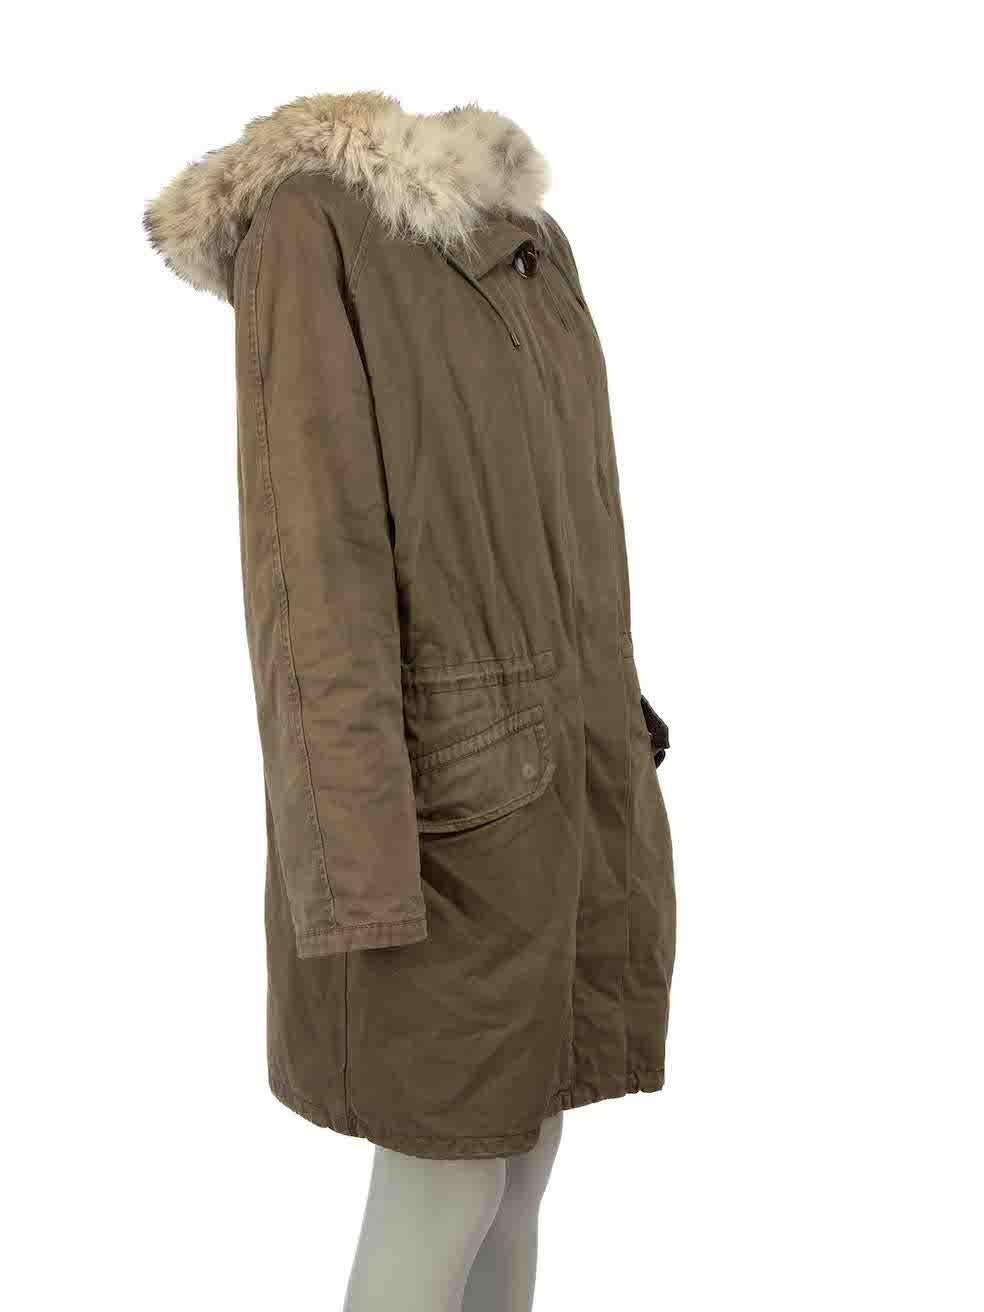 CONDITION is Very good. Minimal wear to jacket is evident. Minimal wear to fur lining with light abrasion to the pile under the arms and at the neck on this used Yves Salomon designer resale item.
 
Details
Khaki
Cotton
Parka coat
Fur lined
Fur